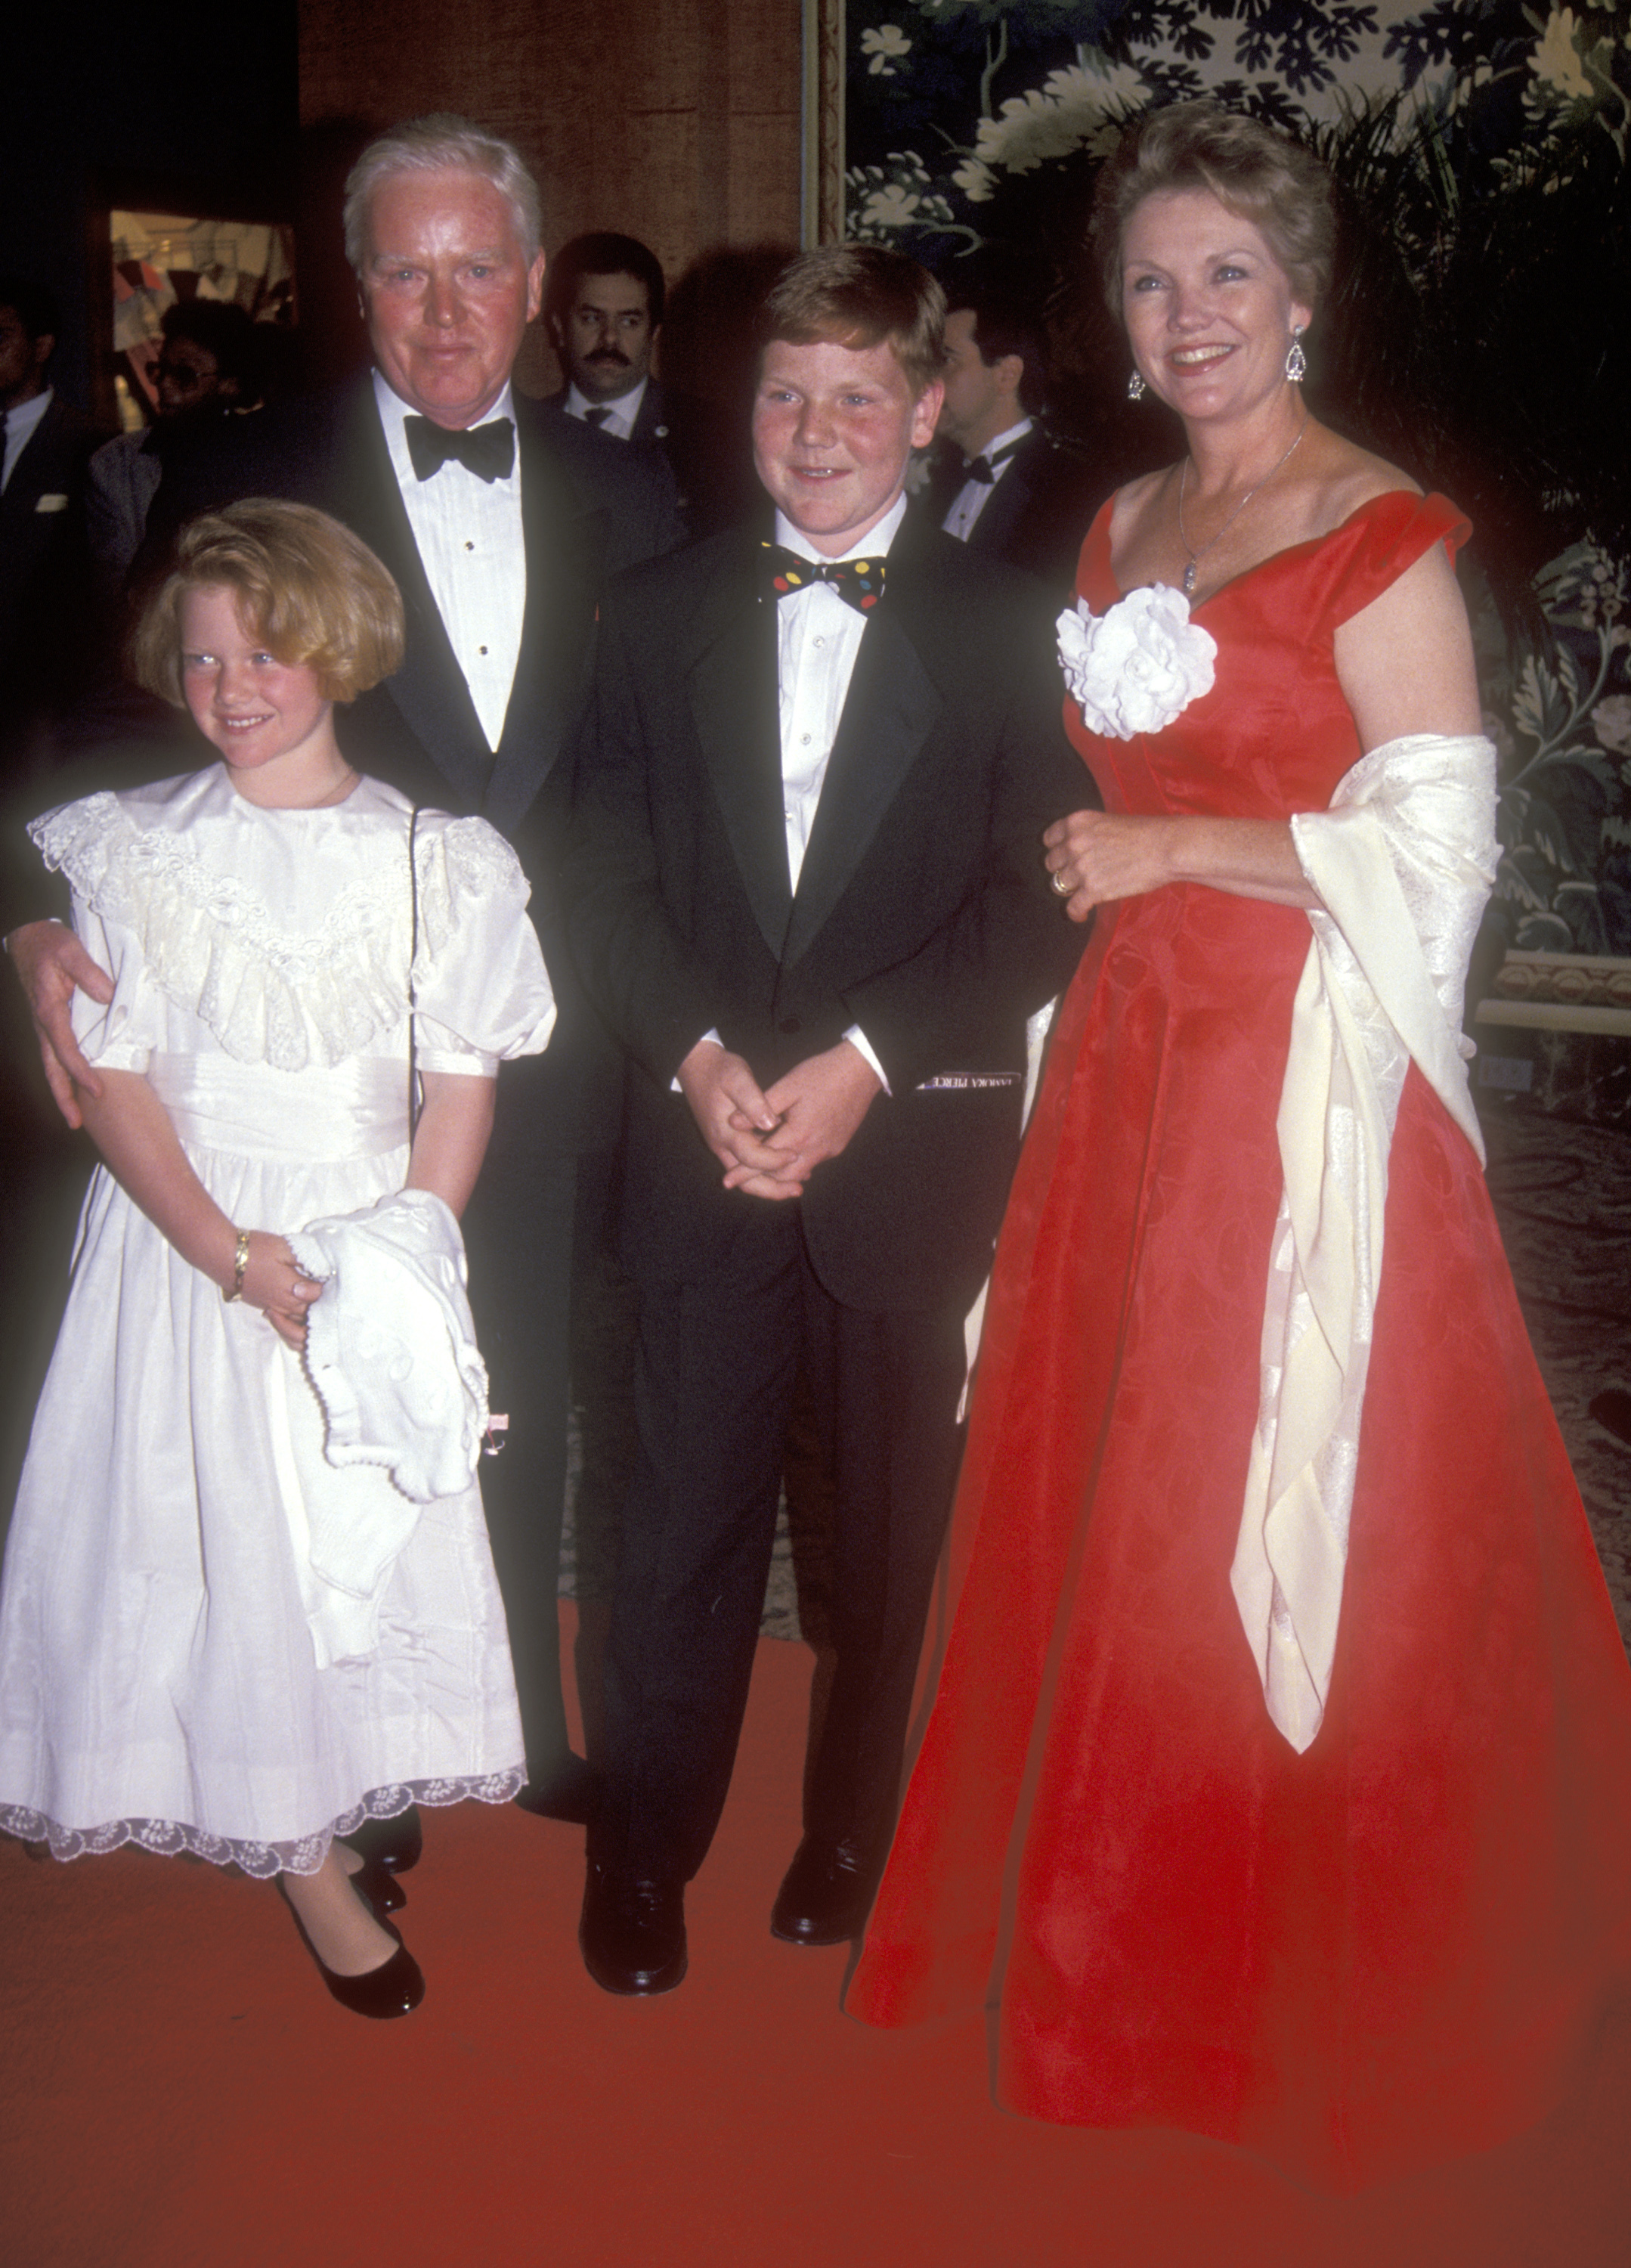 Amanda, Brian and Michael Davies with Erika Slezak at the 19th Annual Daytime Emmy Awards in New York City on June 23, 1992 | Source: Getty Images